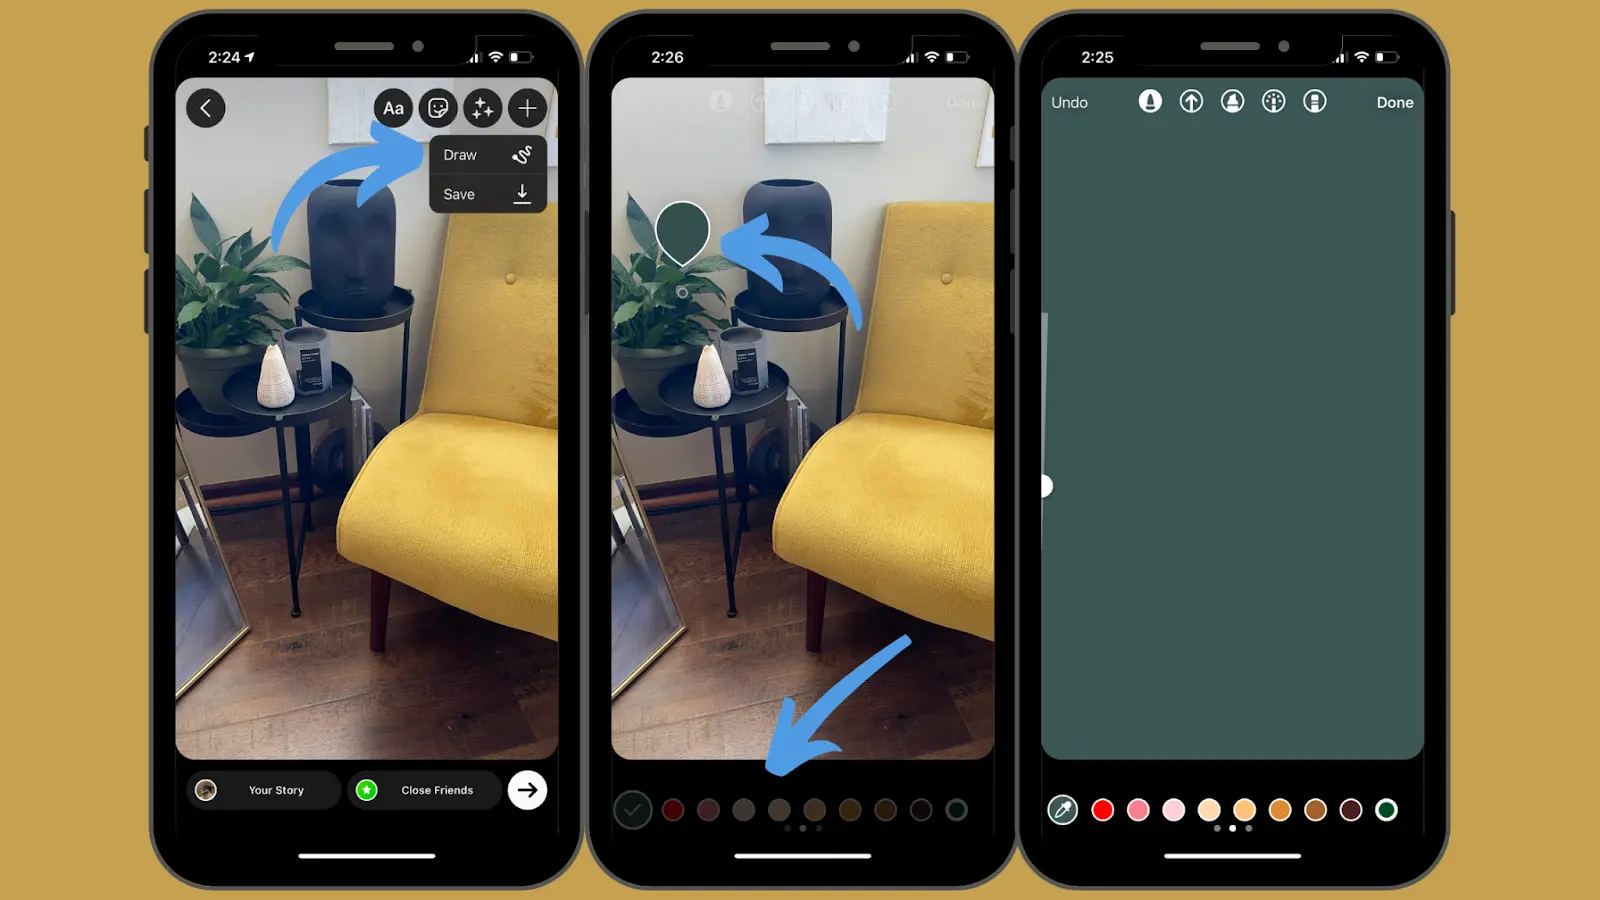 How to change background color on Instagram
Three images showcasing how to use the dropper tool to change the background color on Instagram stories